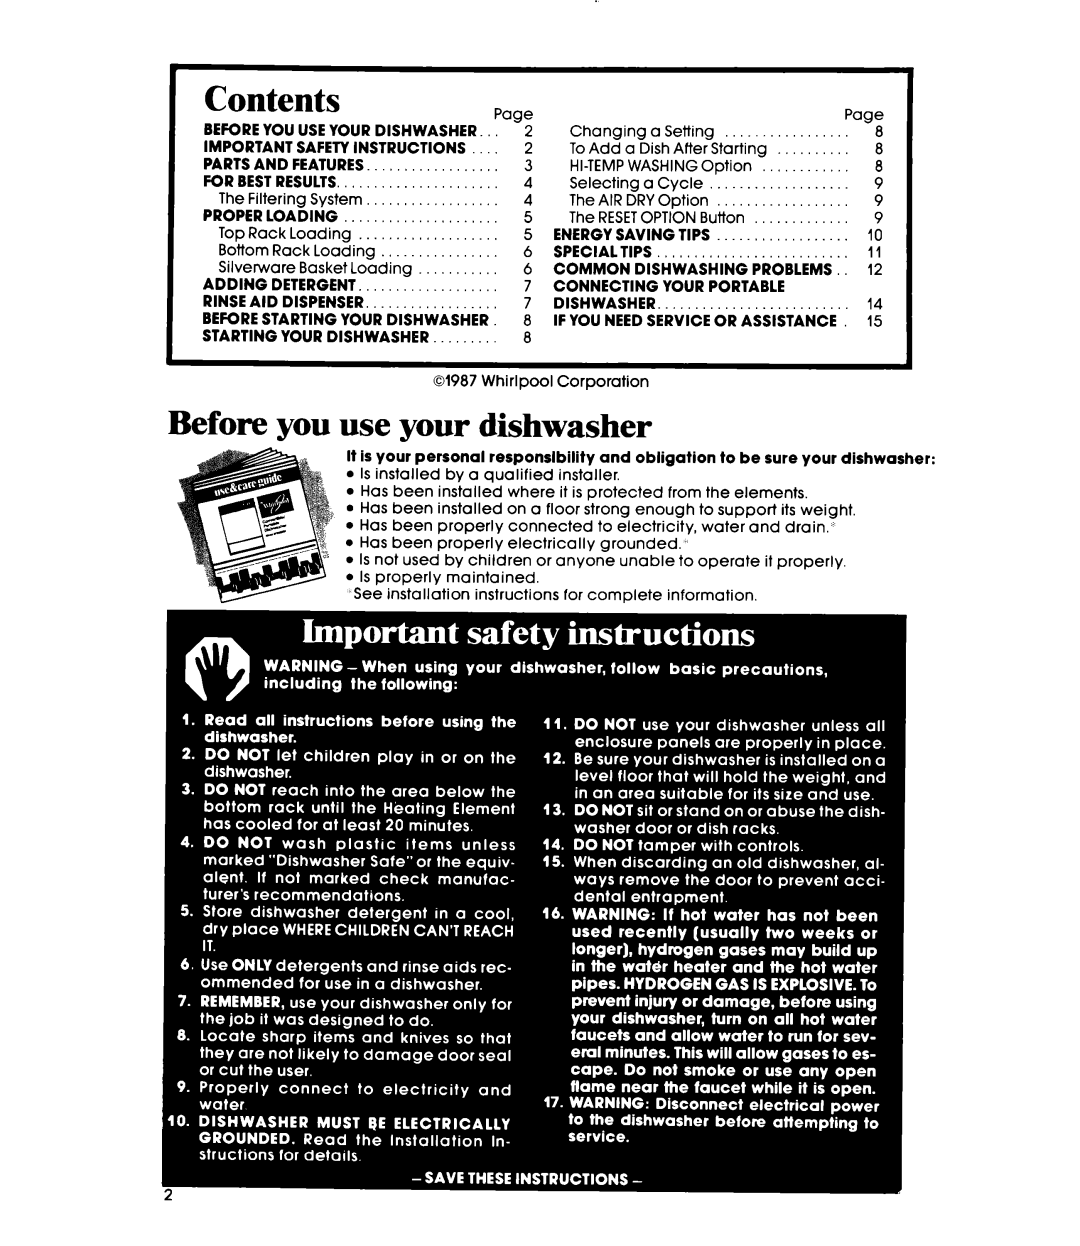 Whirlpool DP4800XS manual Contents, Before you use your dishwasher 